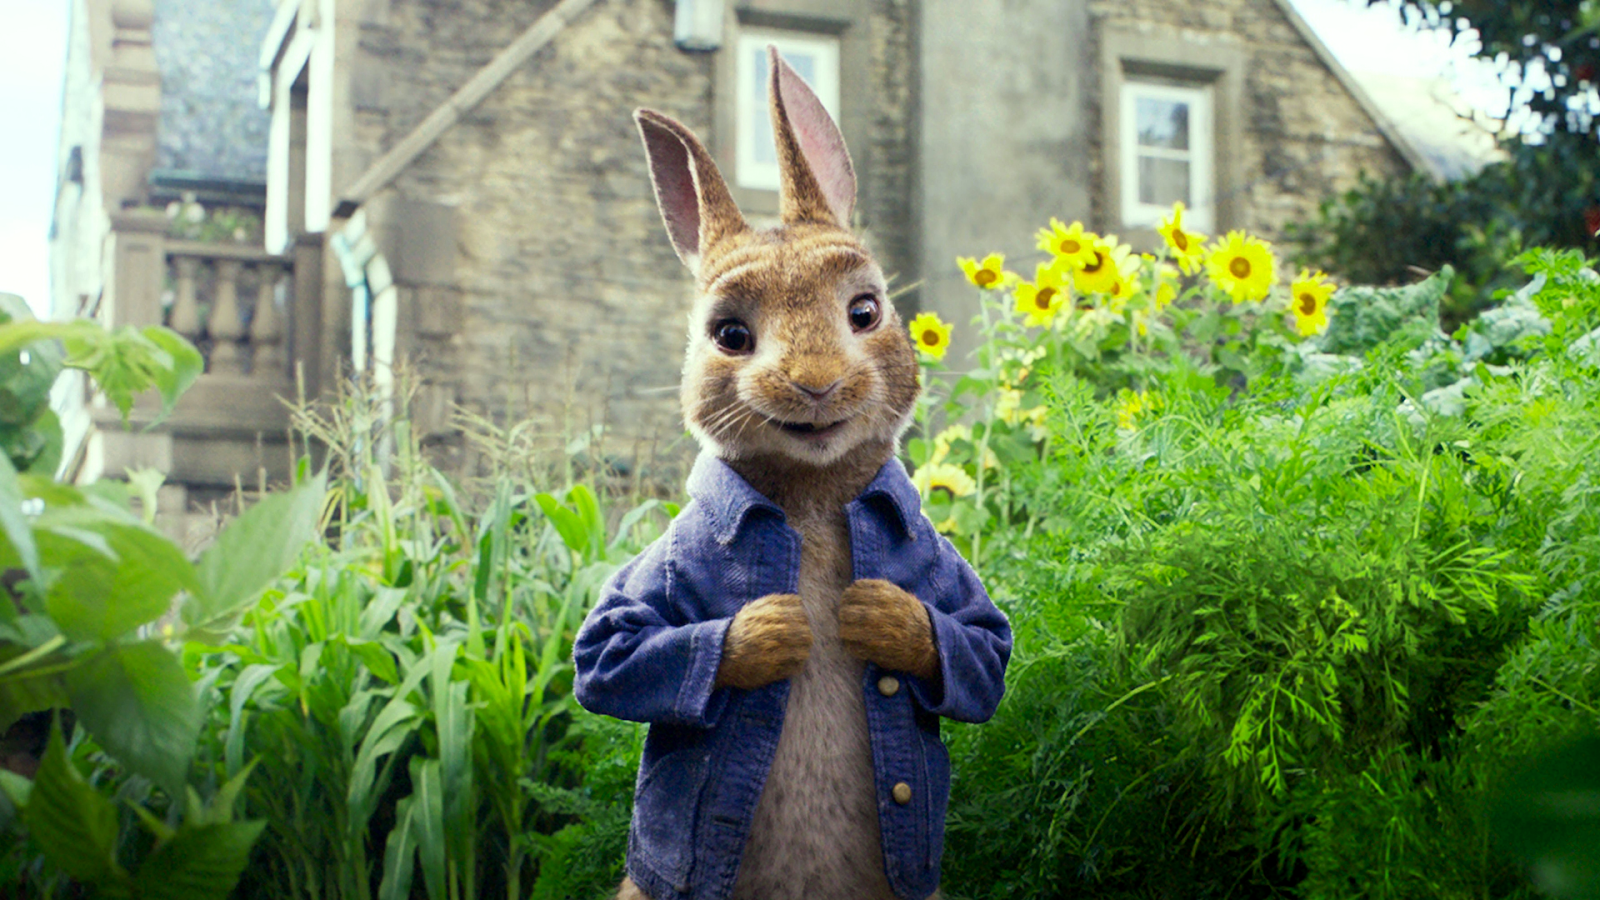 Peter Rabbit   1920x1080 Wallpapers   Full HD Backgrounds